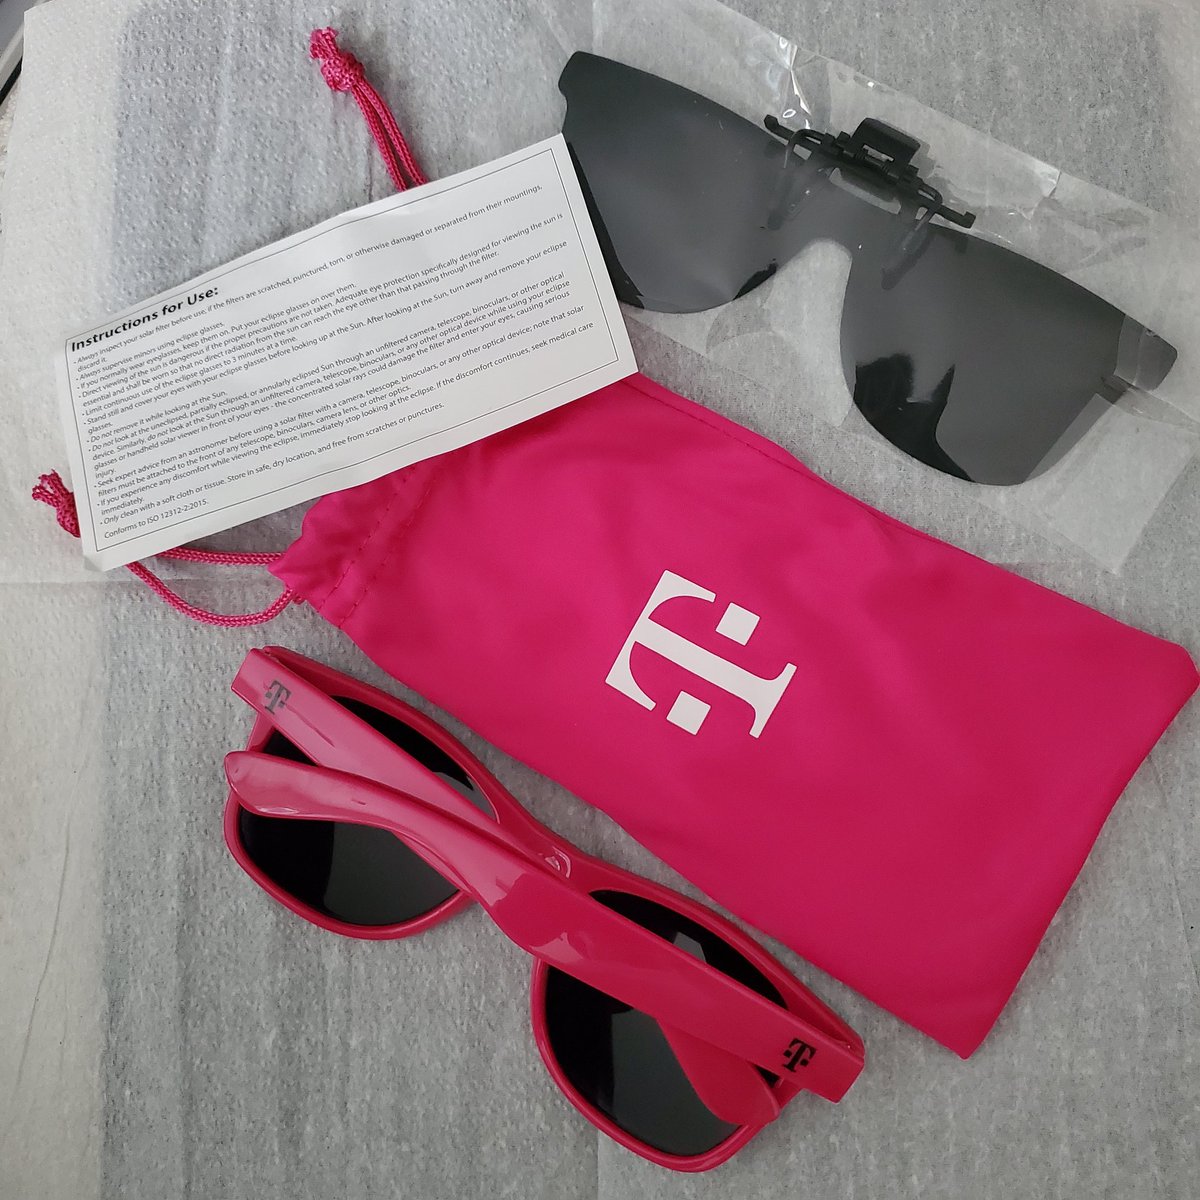 Thank you @TMobile for 'Totality' cool #Sunglasses that came with #eCLIPSe add-ons. I am not in the region to use them but I'll treasure them forever!!

#Tmobile

#TMobileTuesday

#WeGetThanked